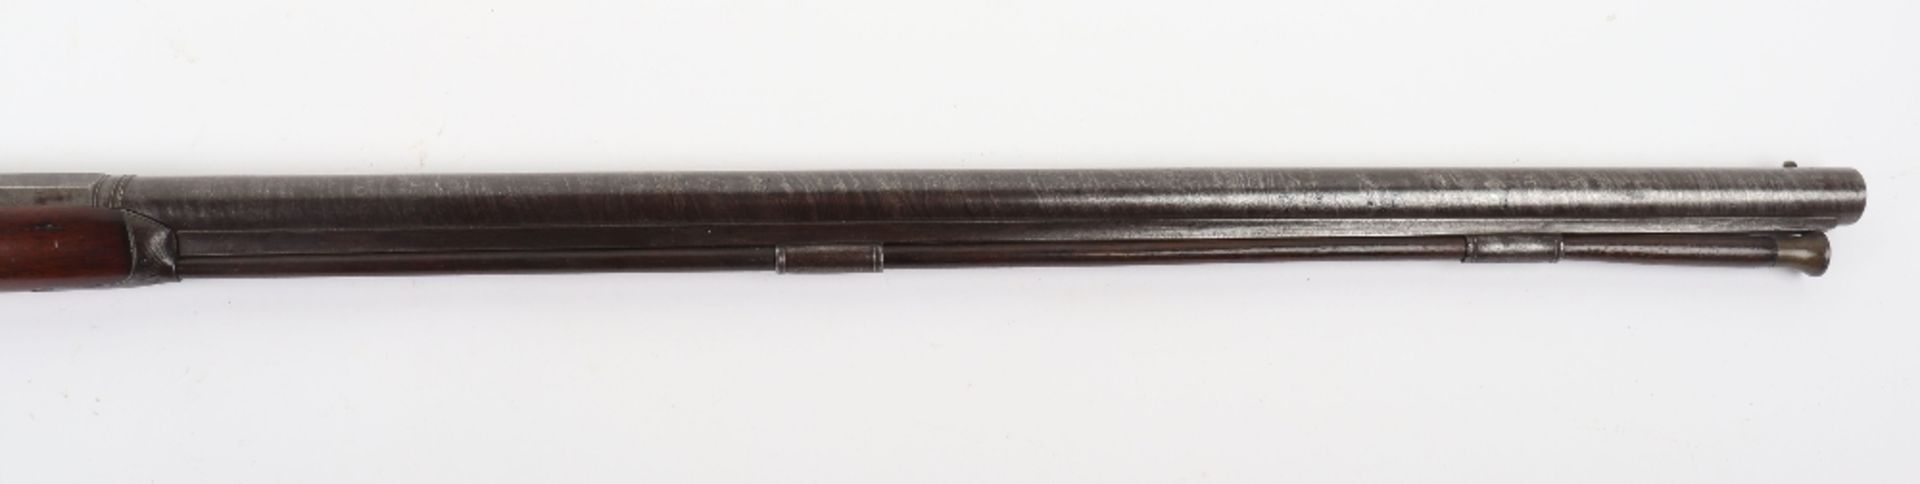 16-Bore Percussion Sporting Gun by D. Egg, Late 18th Century - Image 12 of 15